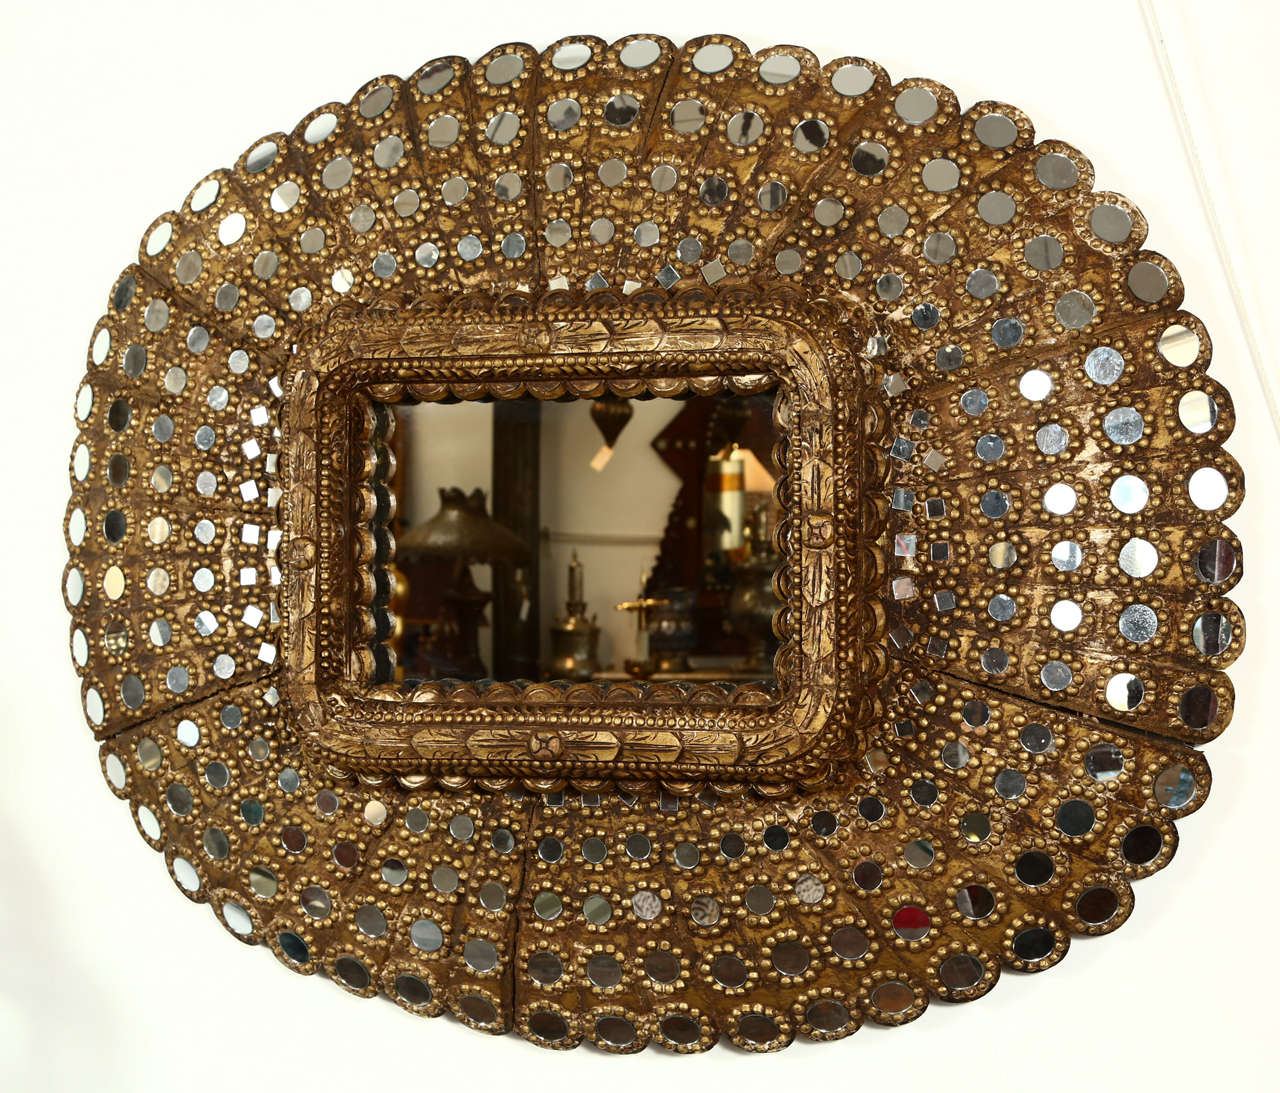 Large scale Moorish gilt wood peacock mirror.
Impressive Hispano Moresque large scale hand-carved gilt wood inset with a multitude of small mirrors.
Could be hang both ways.